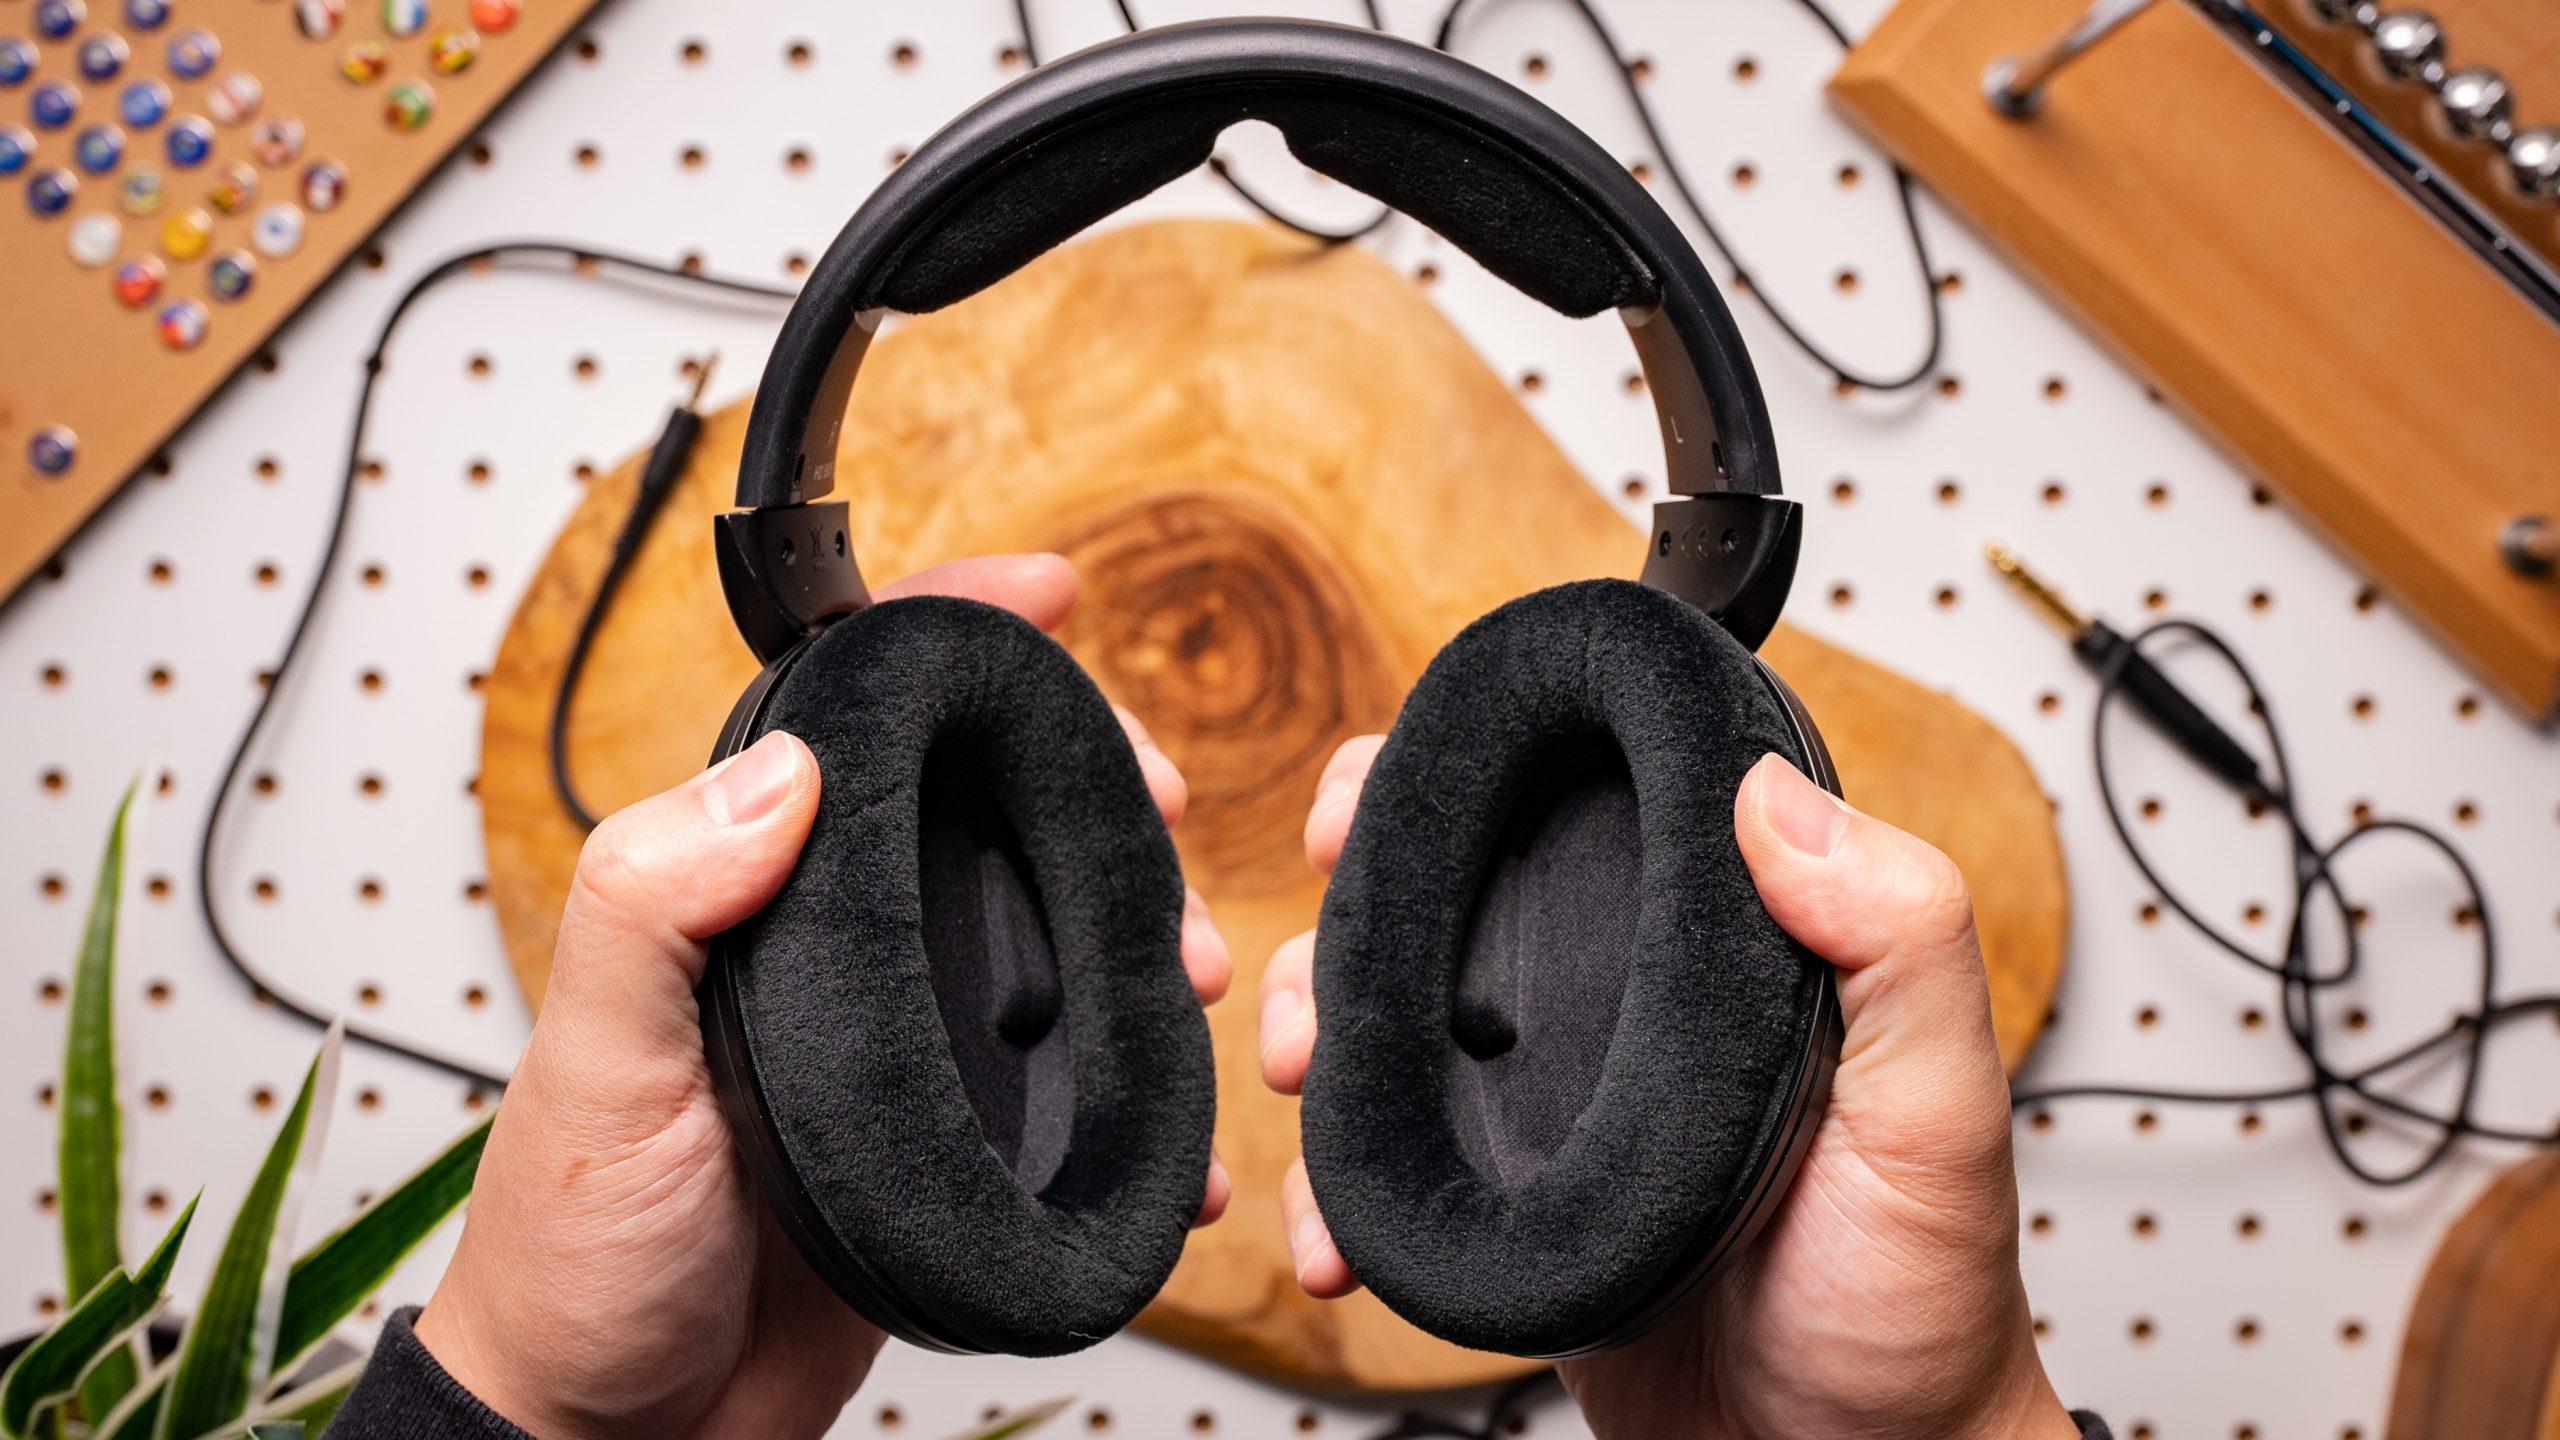 A photo of the Sennheiser HD 560S' cloth ear pads, held in front of wood and pegboard.